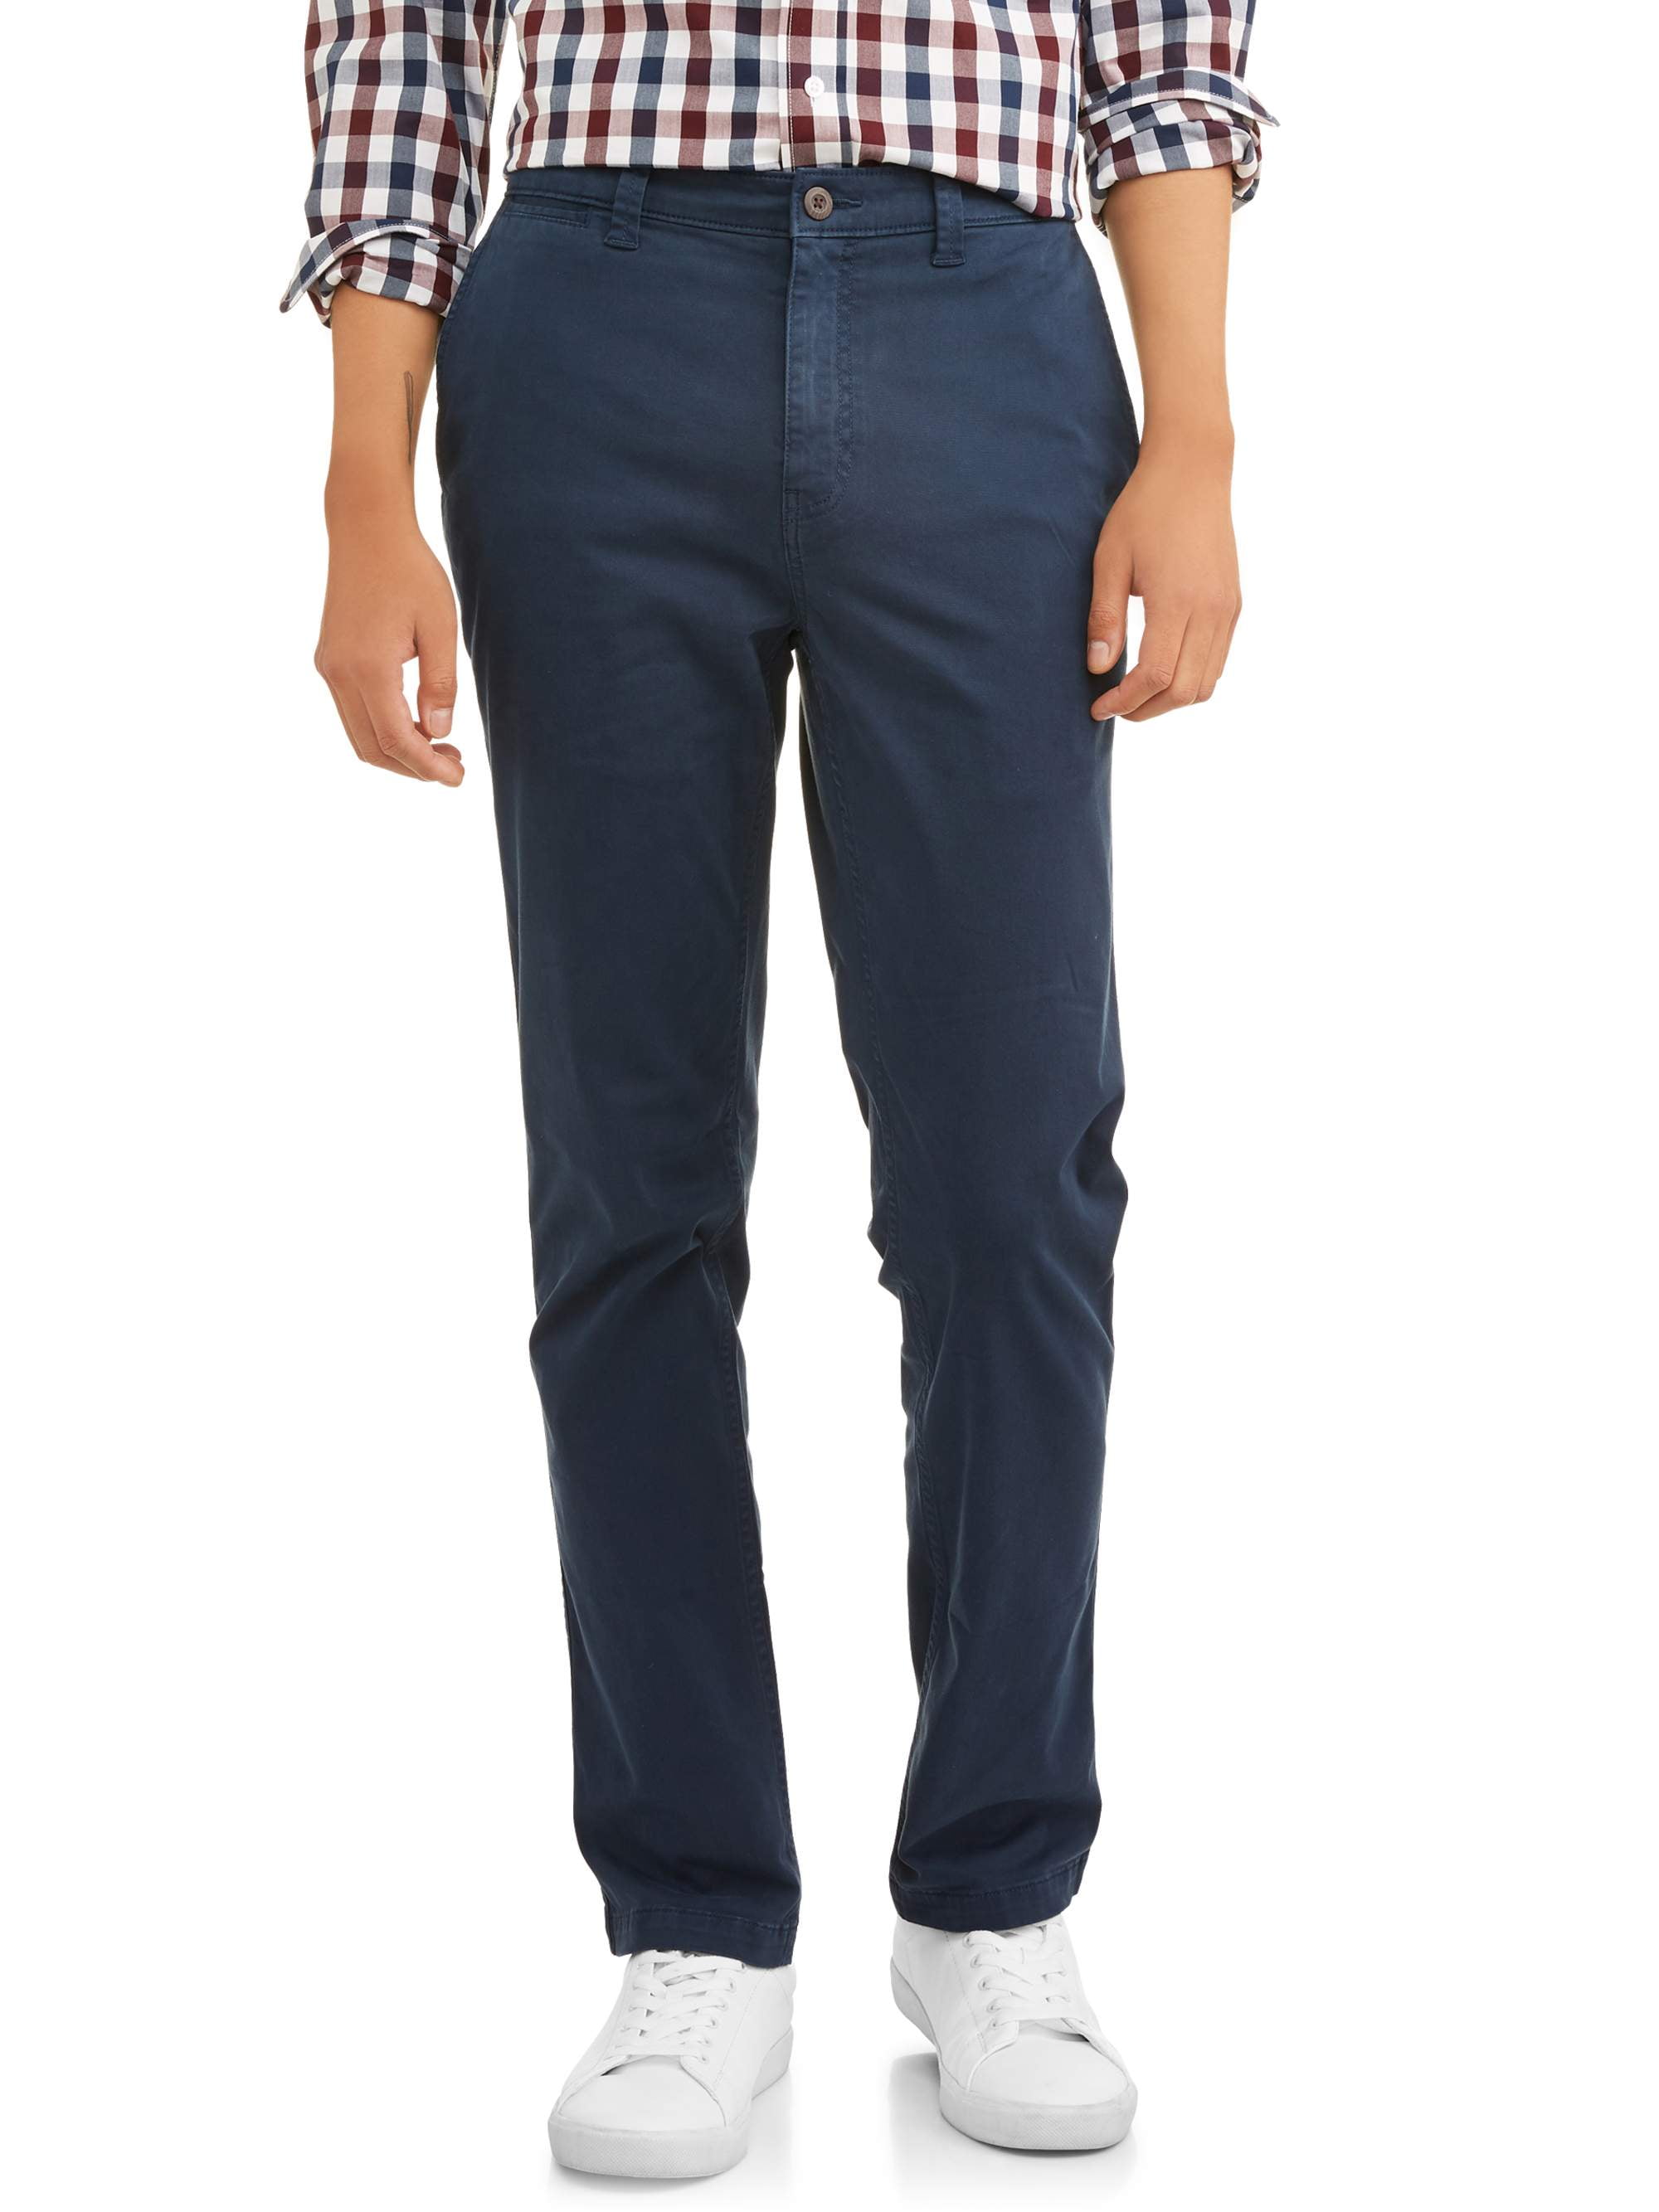 How To Wear Blue Chinos | lupon.gov.ph